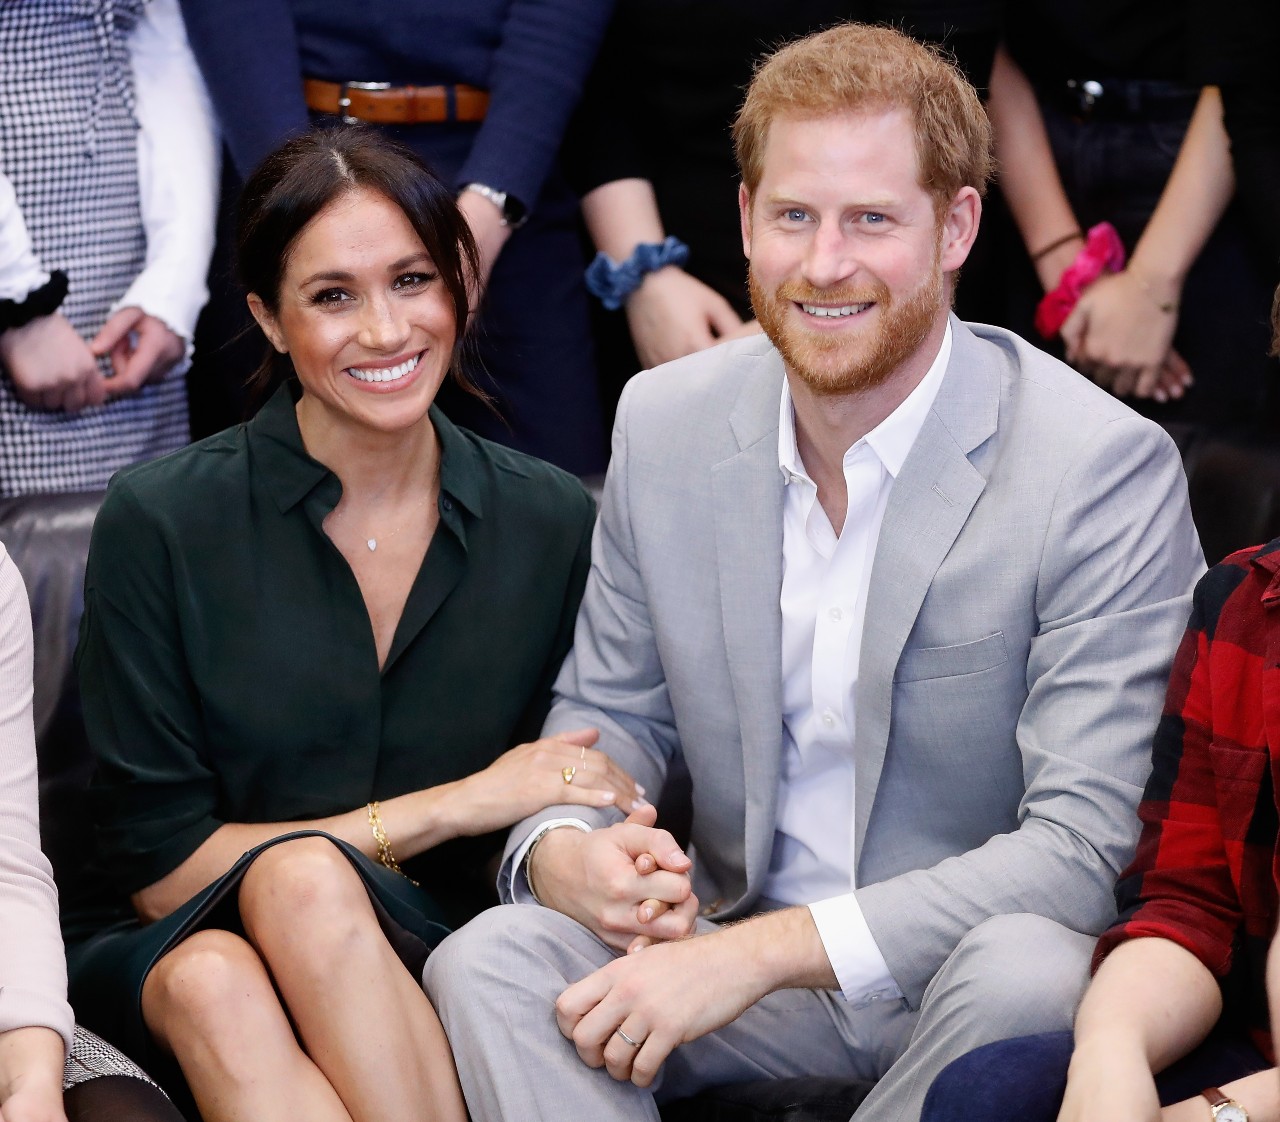 Meghan Markle and Prince Harry attend an event together.